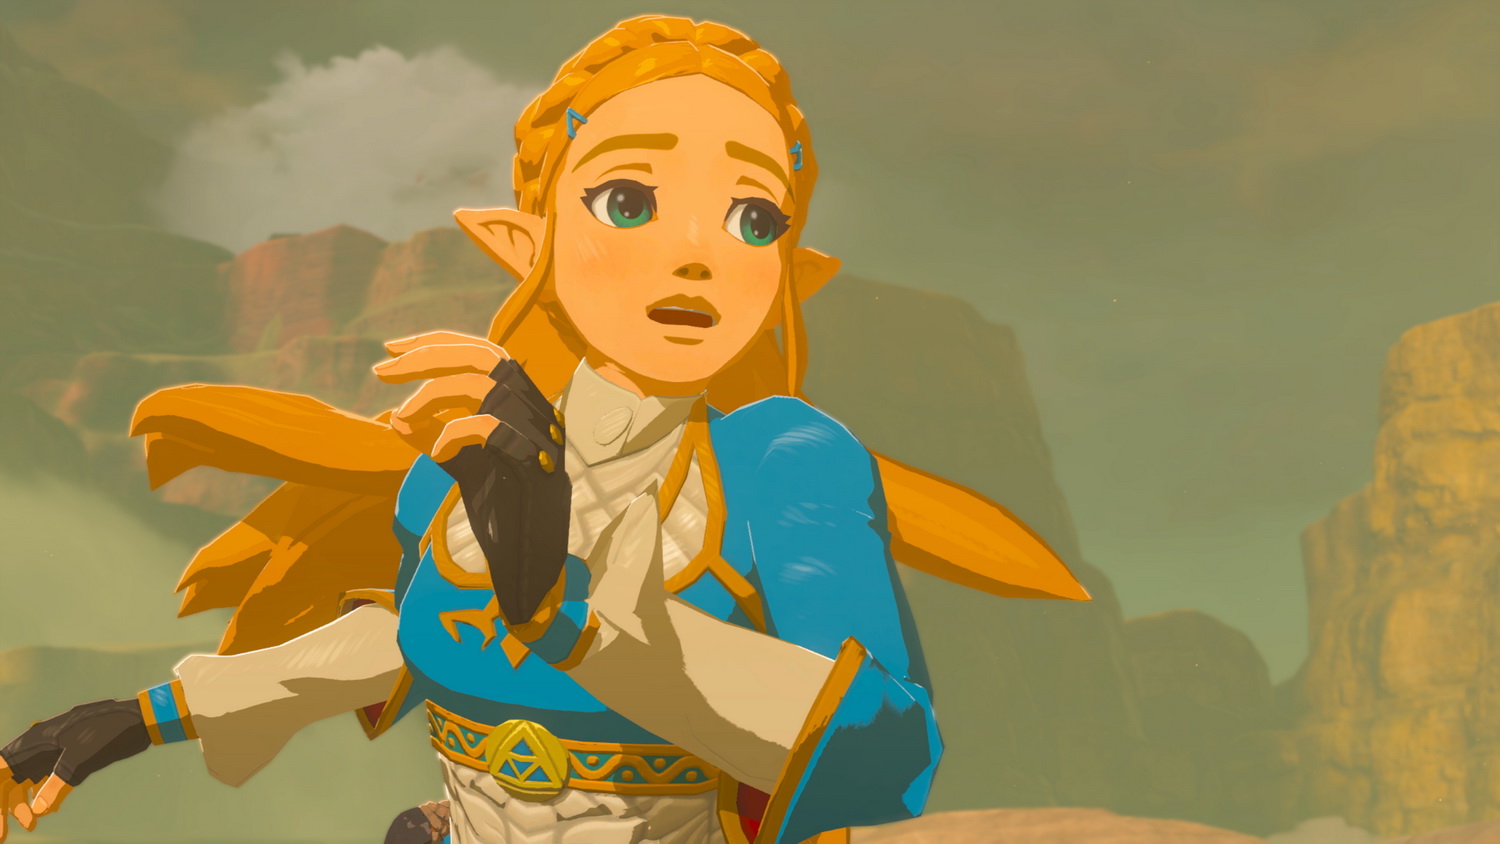 Nintendo is making a live-action Zelda movie - The Verge